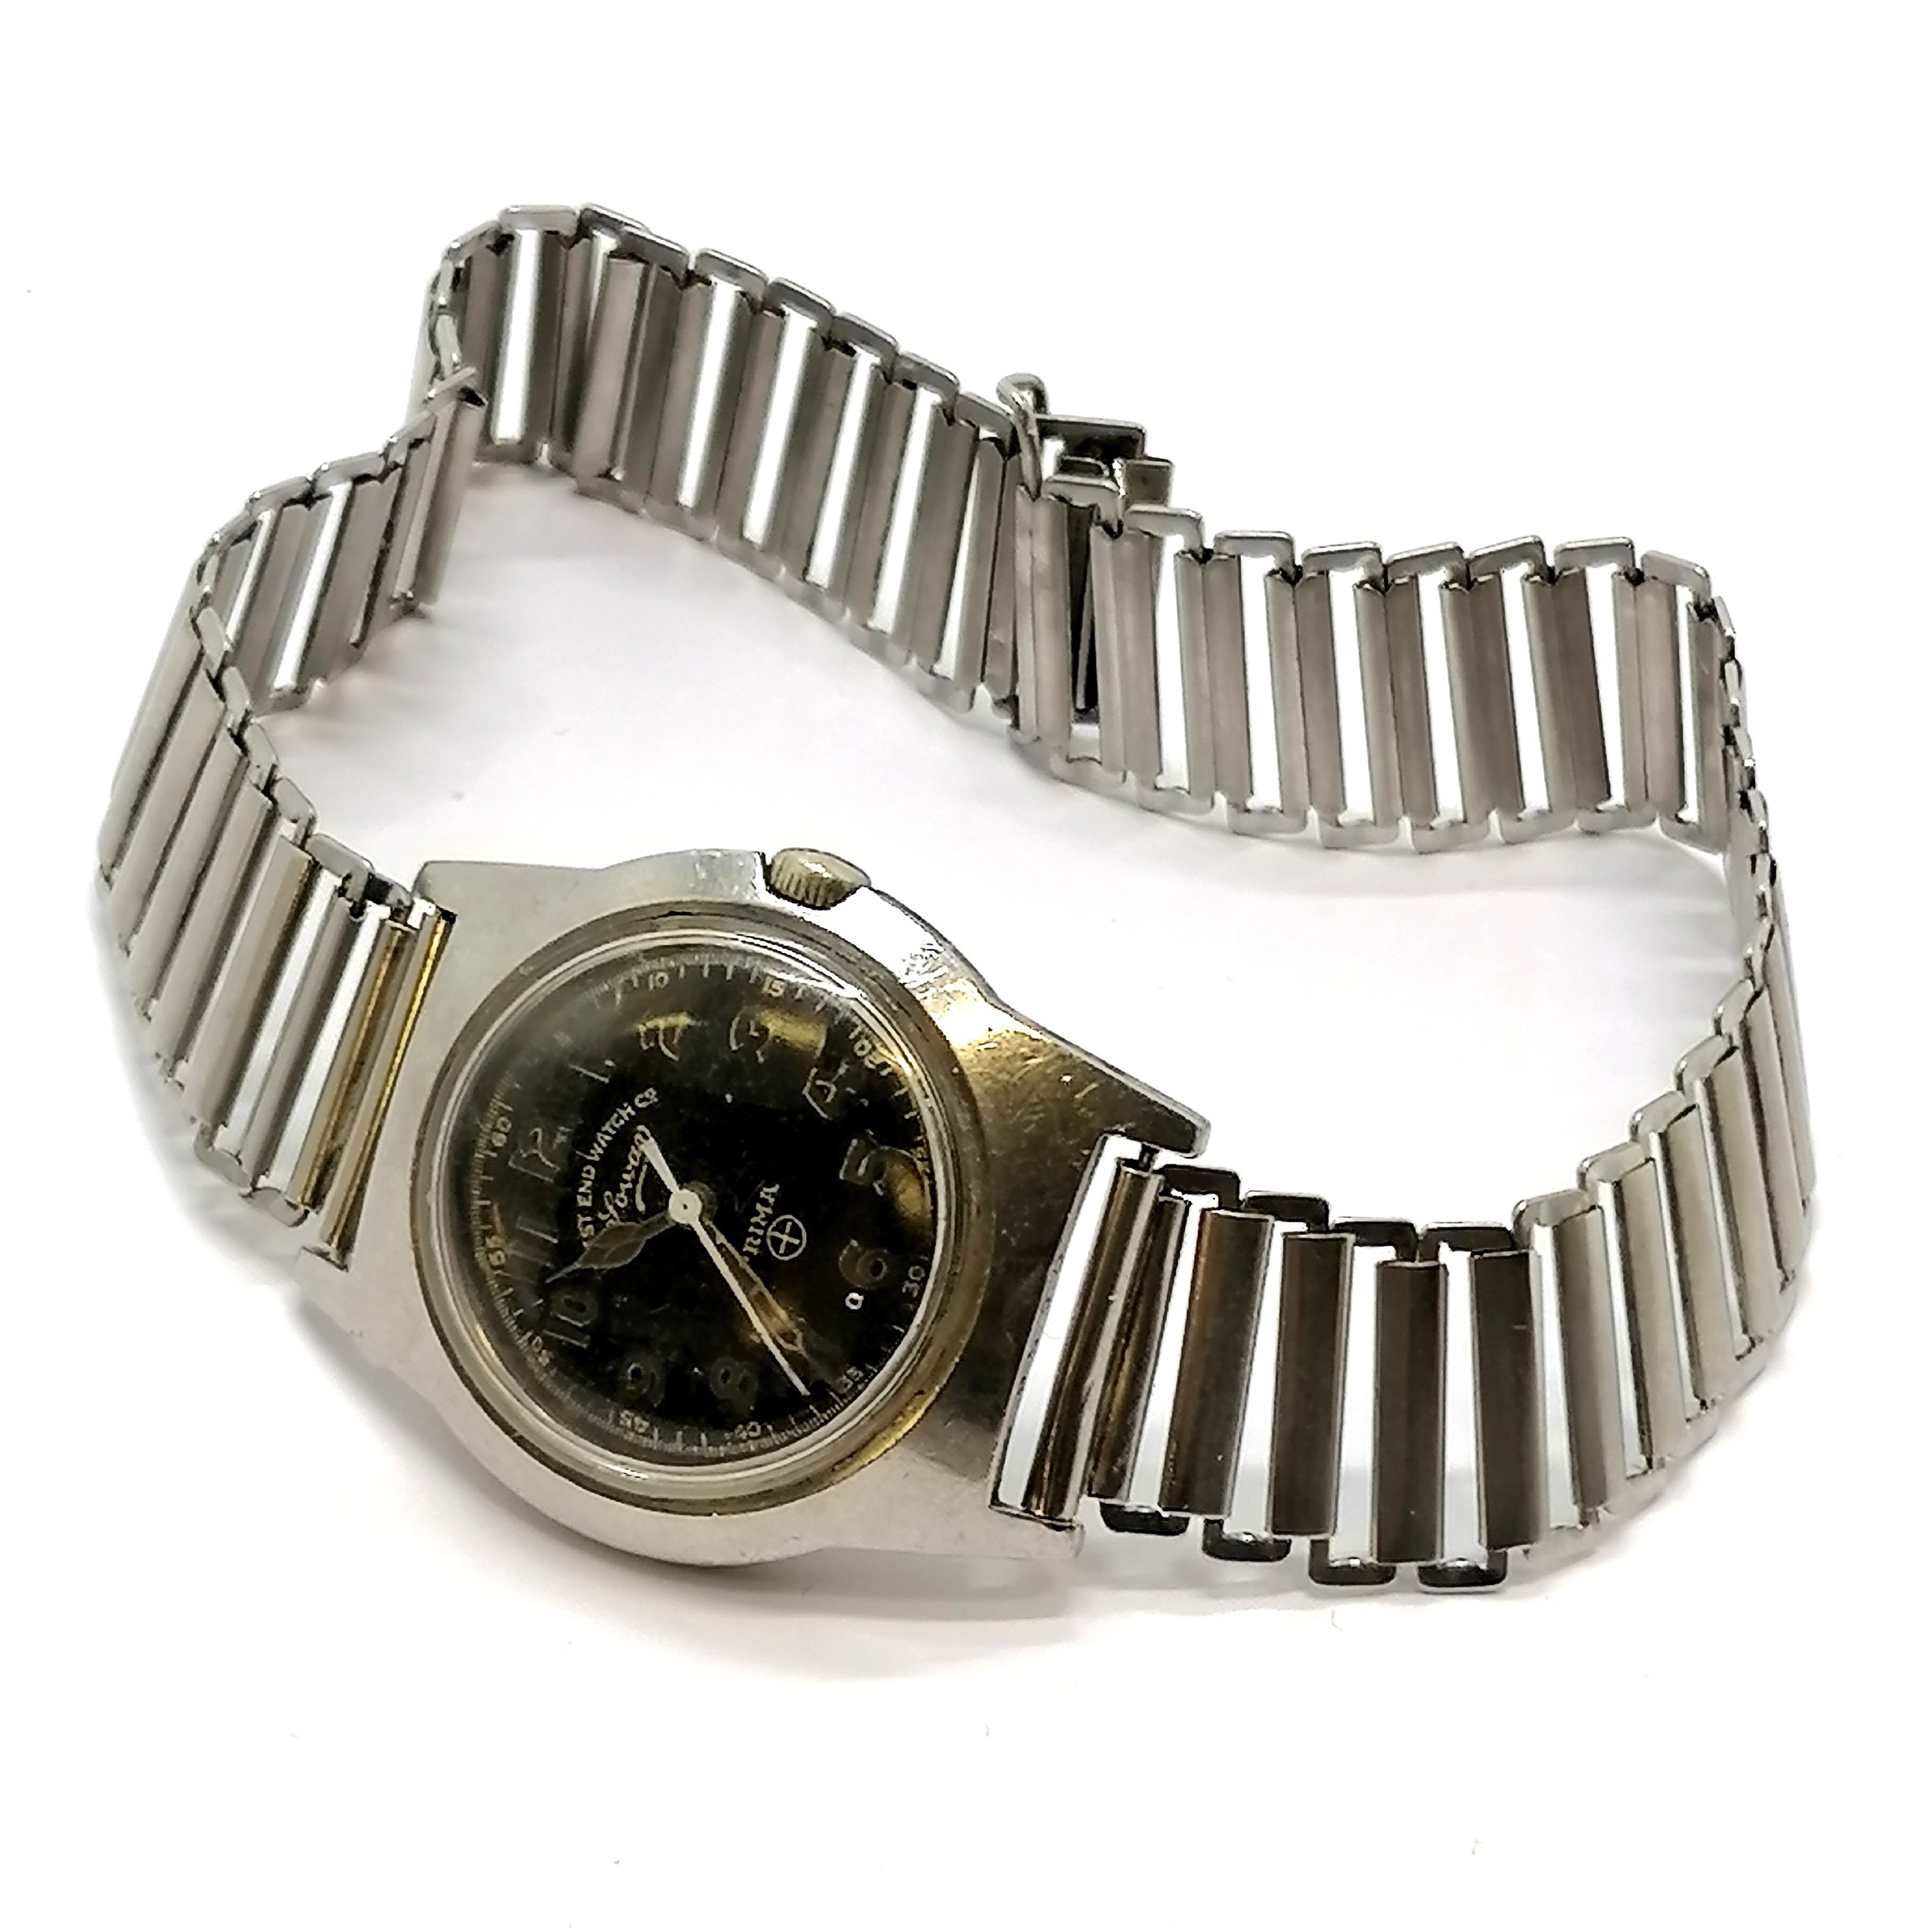 British military marked West end watch company Sowan stainless steel wristwatch (34mm case) - has - Image 5 of 5